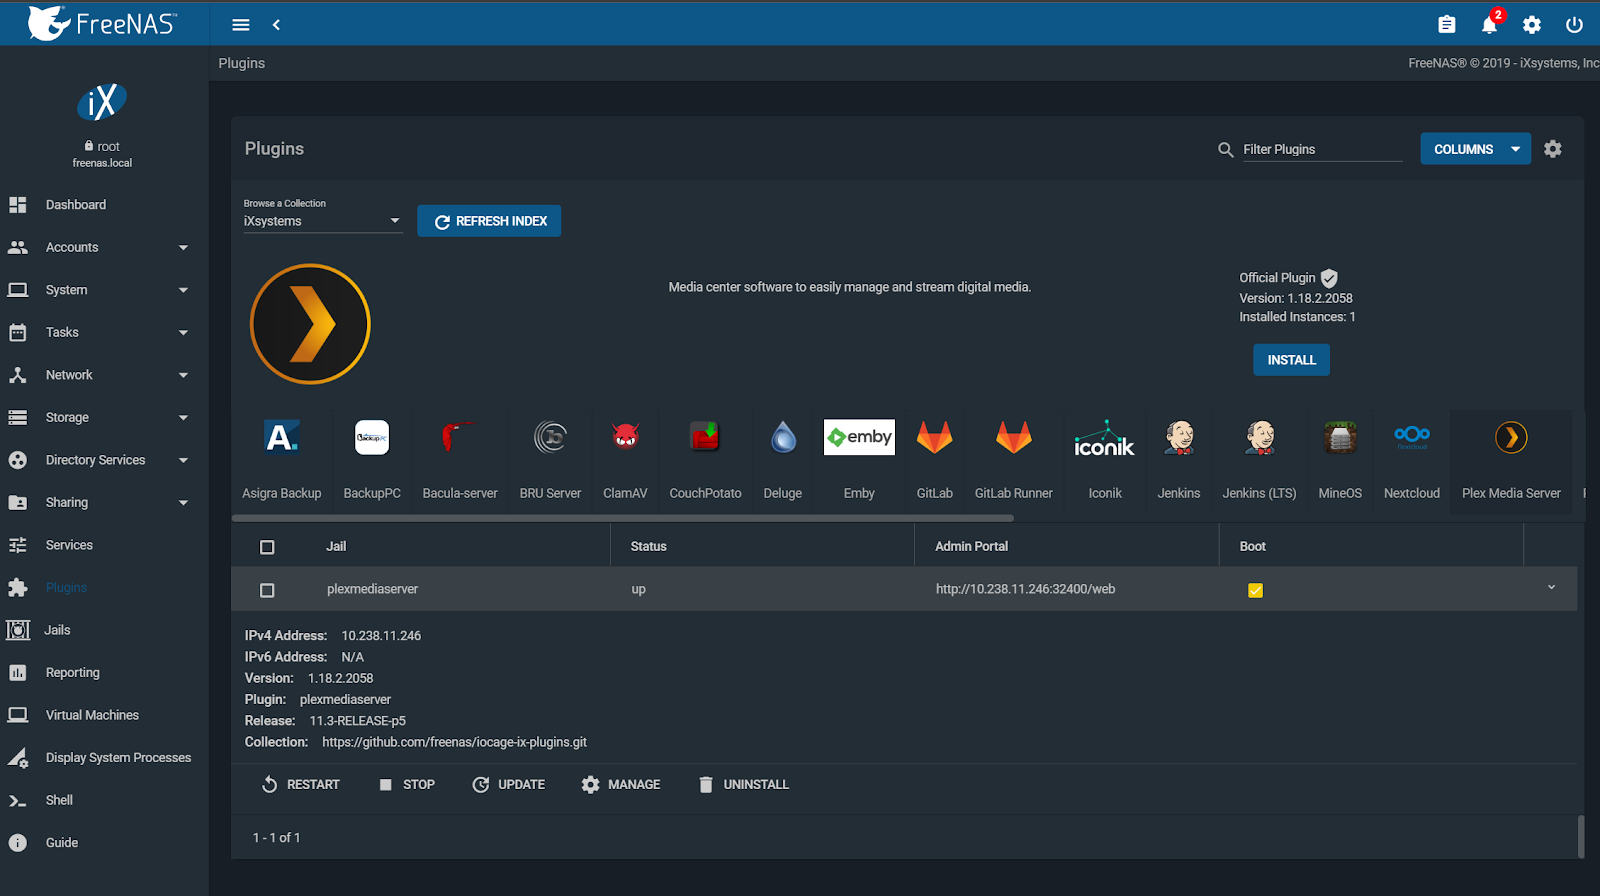 The Plex Media Server plugin for FreeNAS can be managed after installation